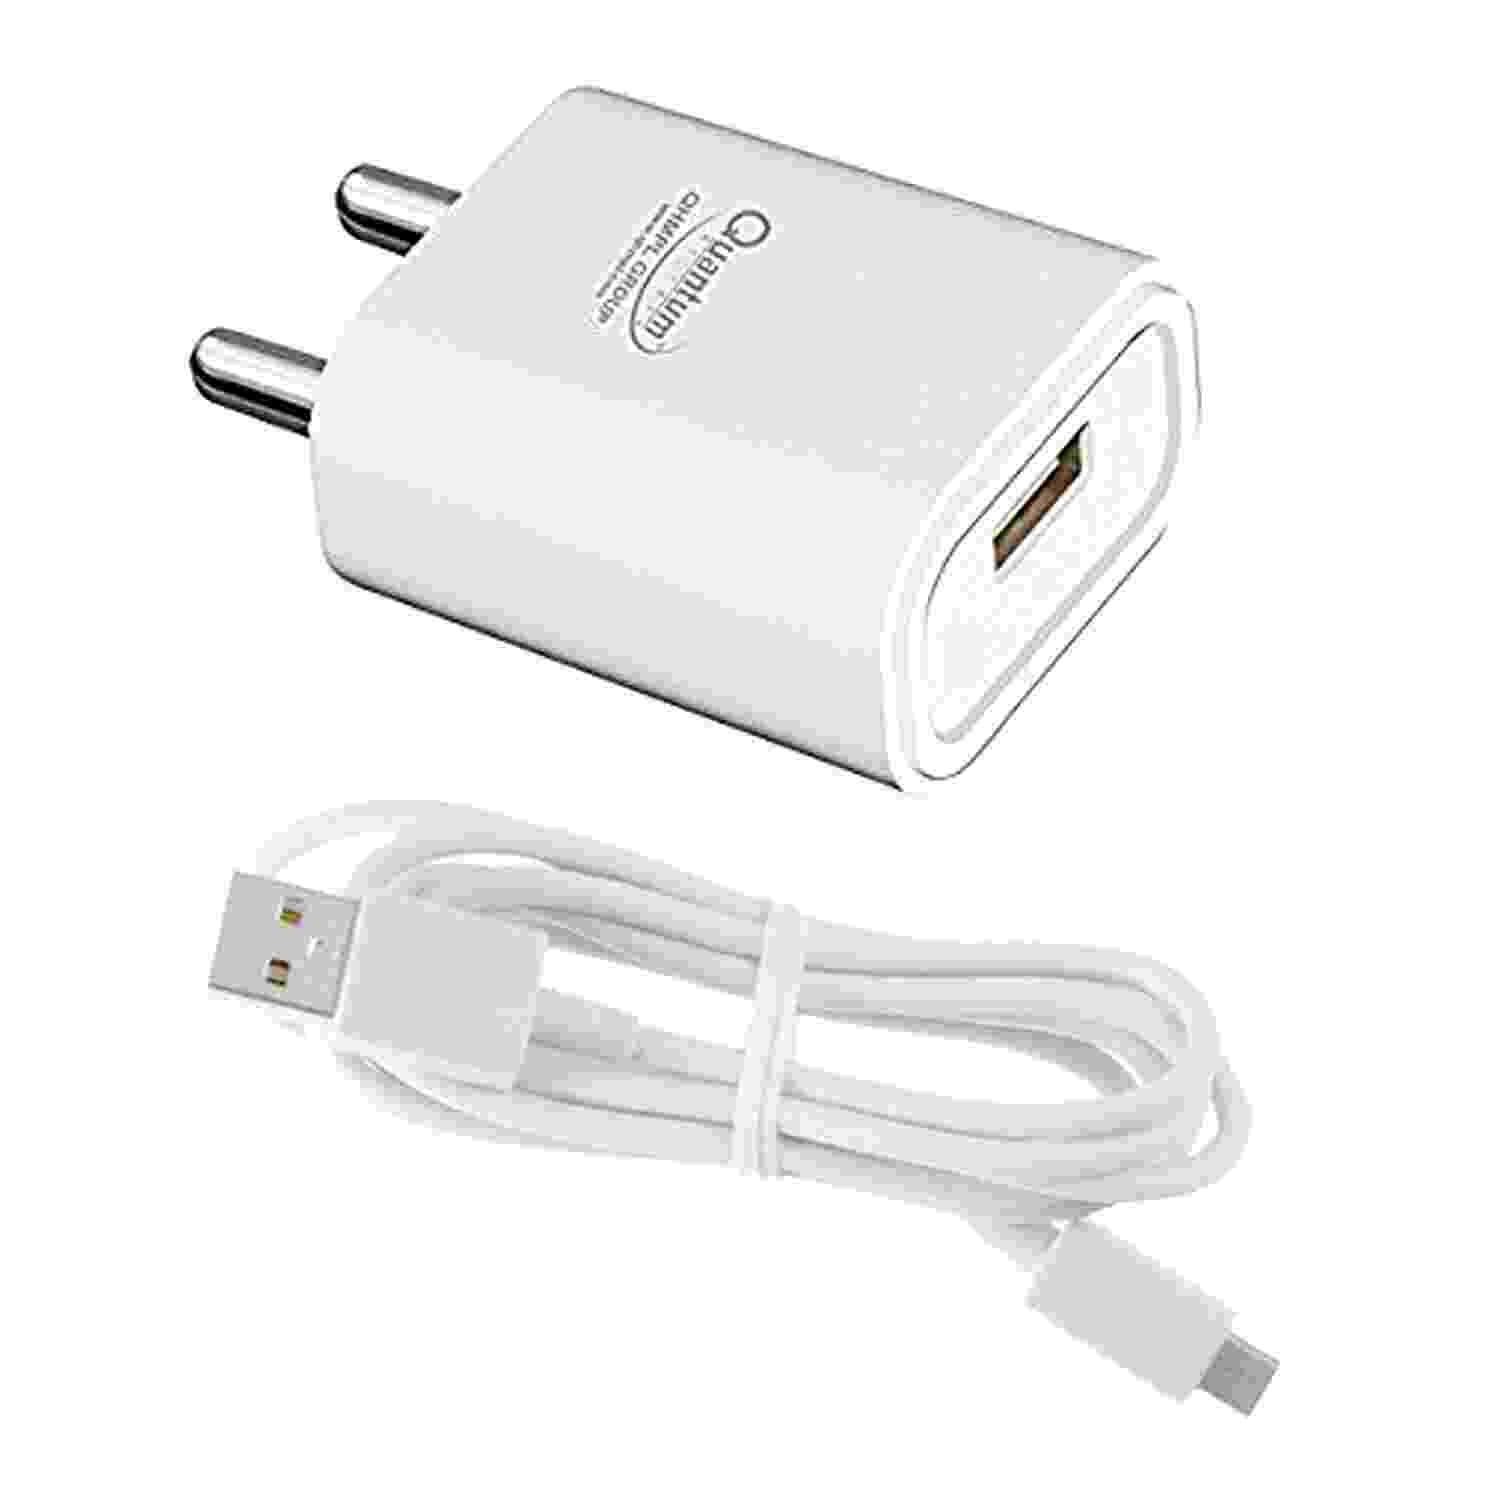 Quantum 2A Type C Single Port Mobile Charger with Detachable Cable (White)